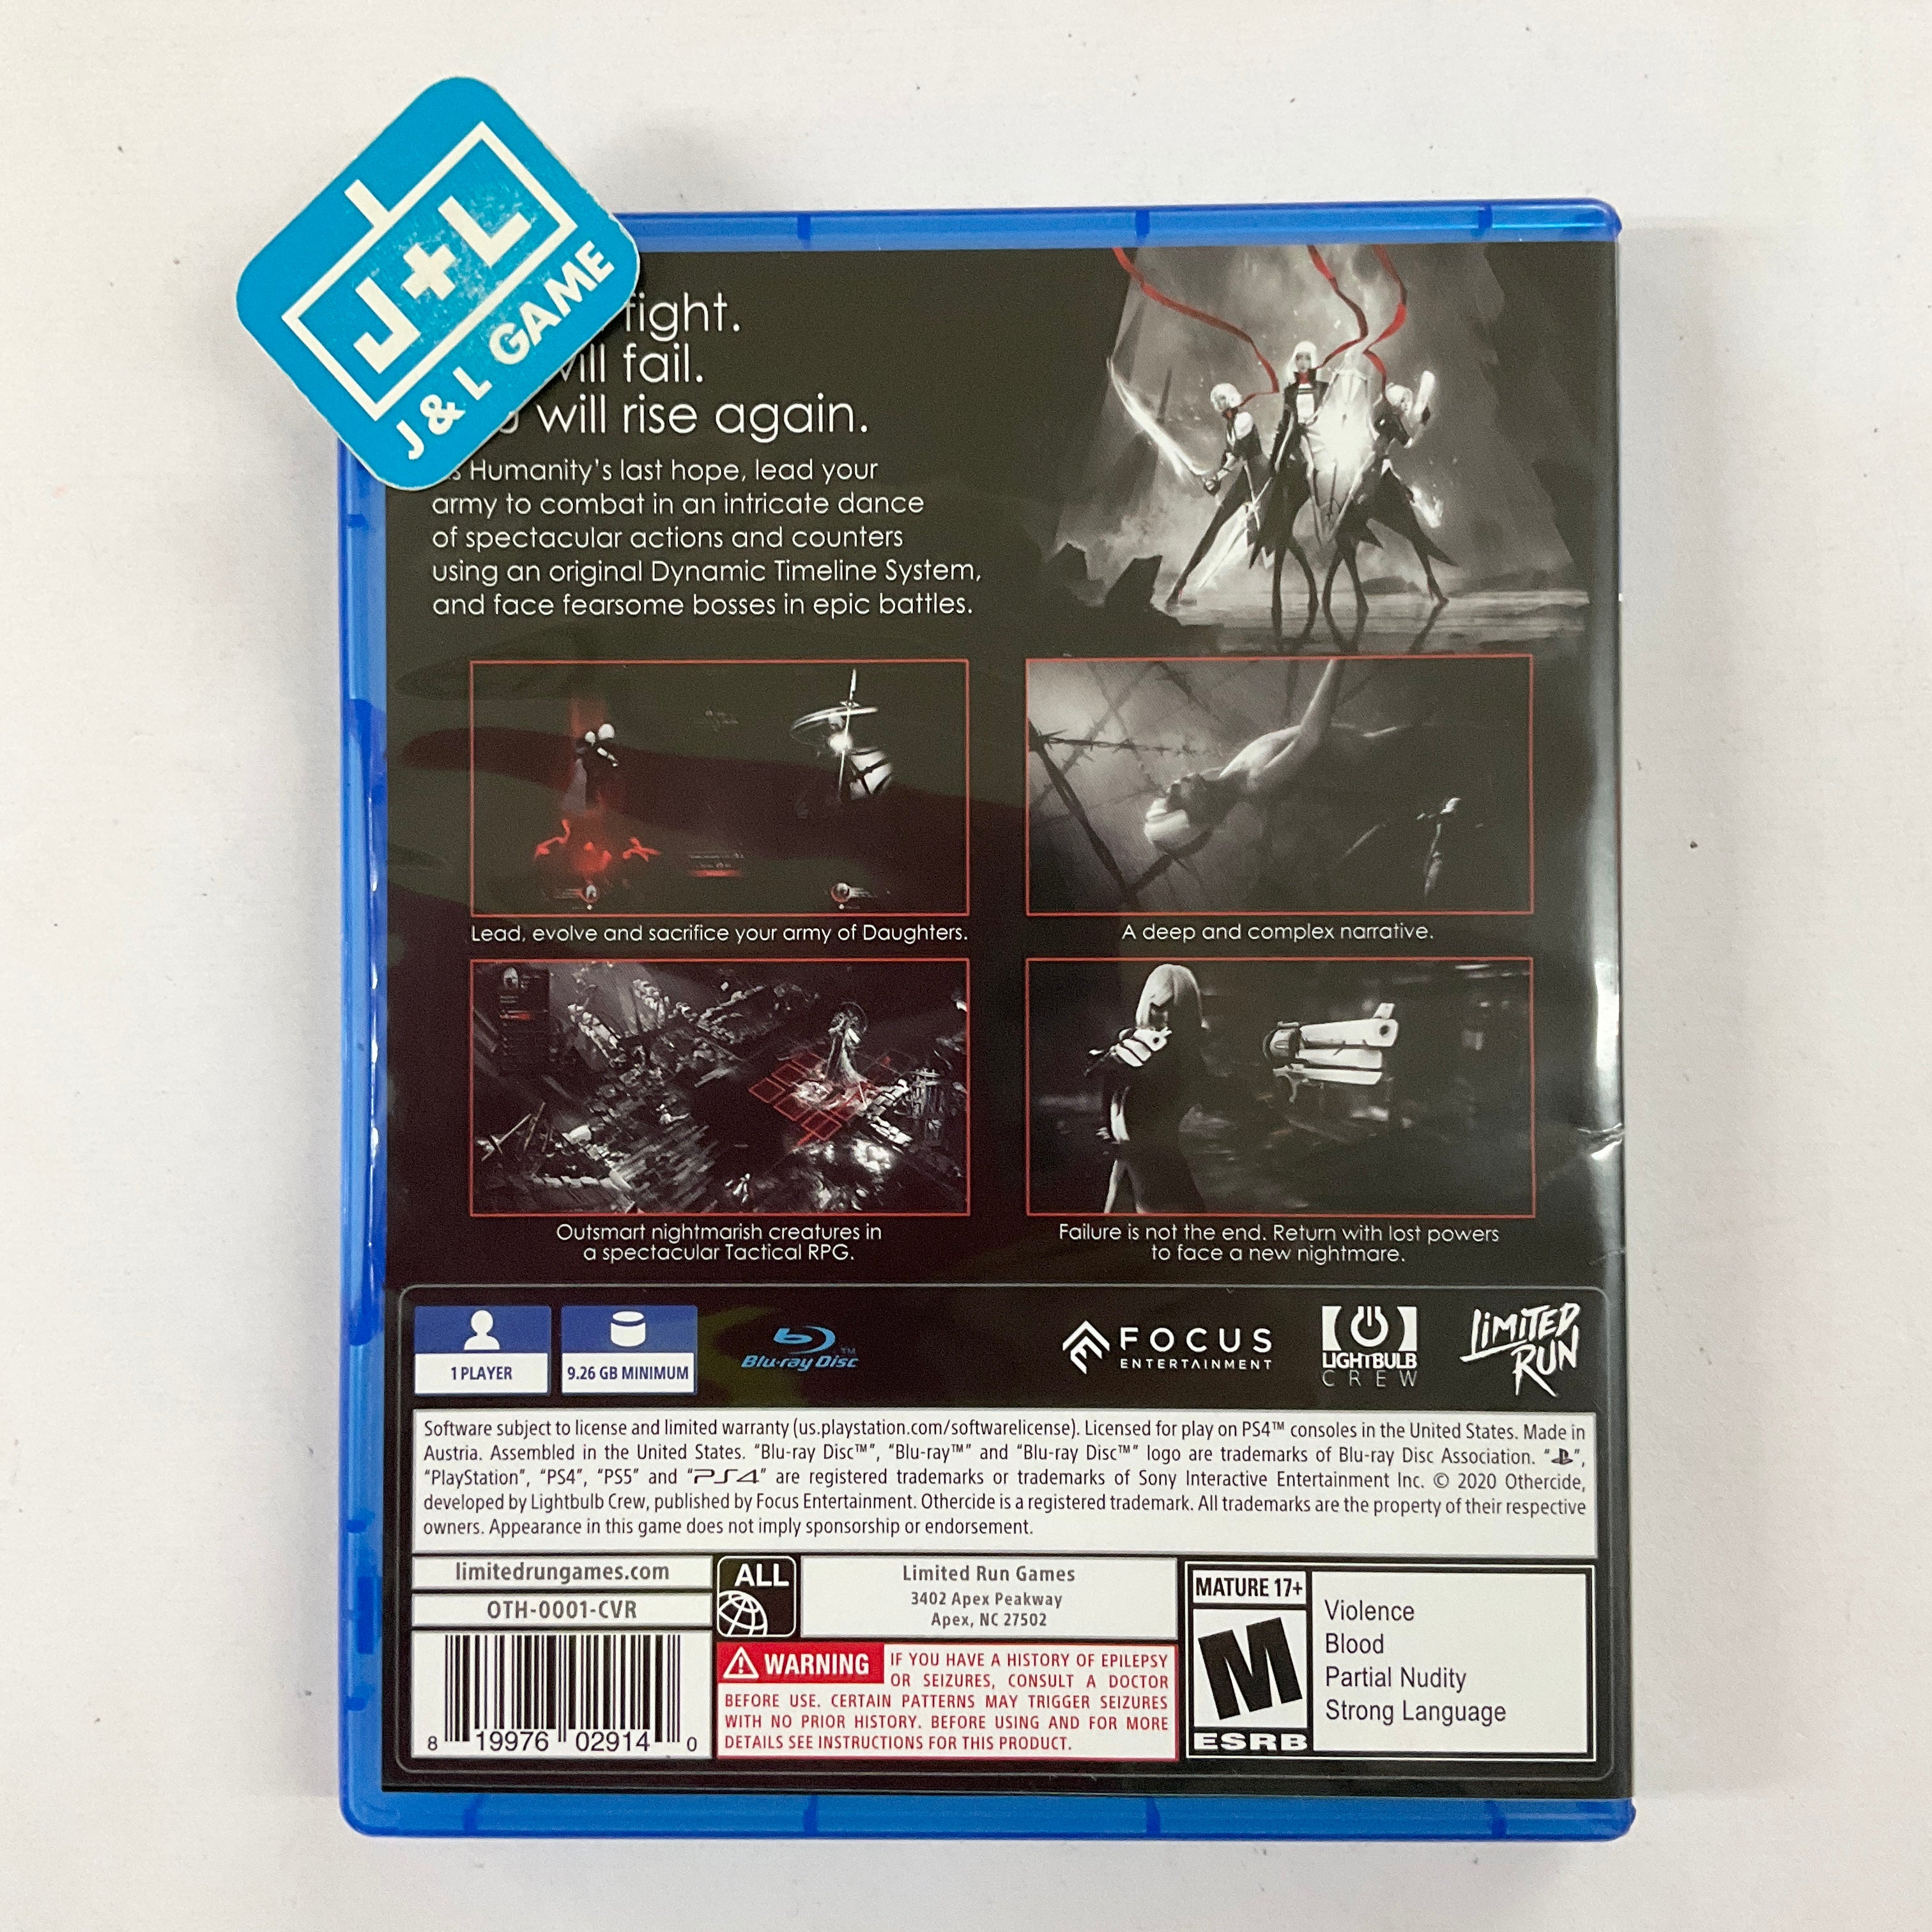 Othercide - (PS4) PlayStation 4 [Pre-Owned] Video Games Limited Run Games   